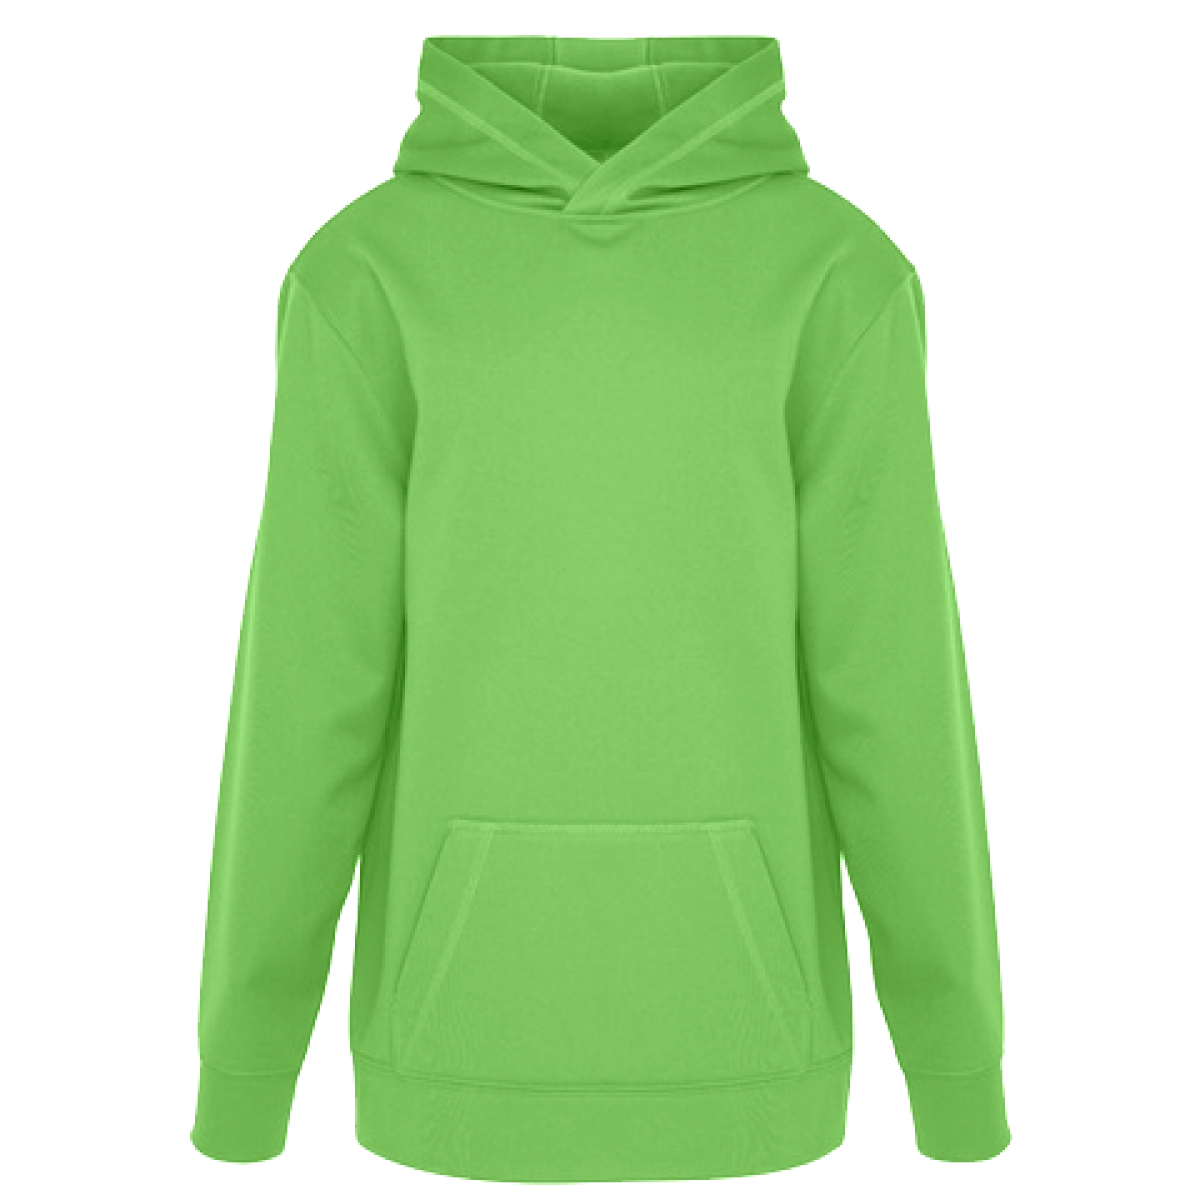 Green Hoodie PNG Picture